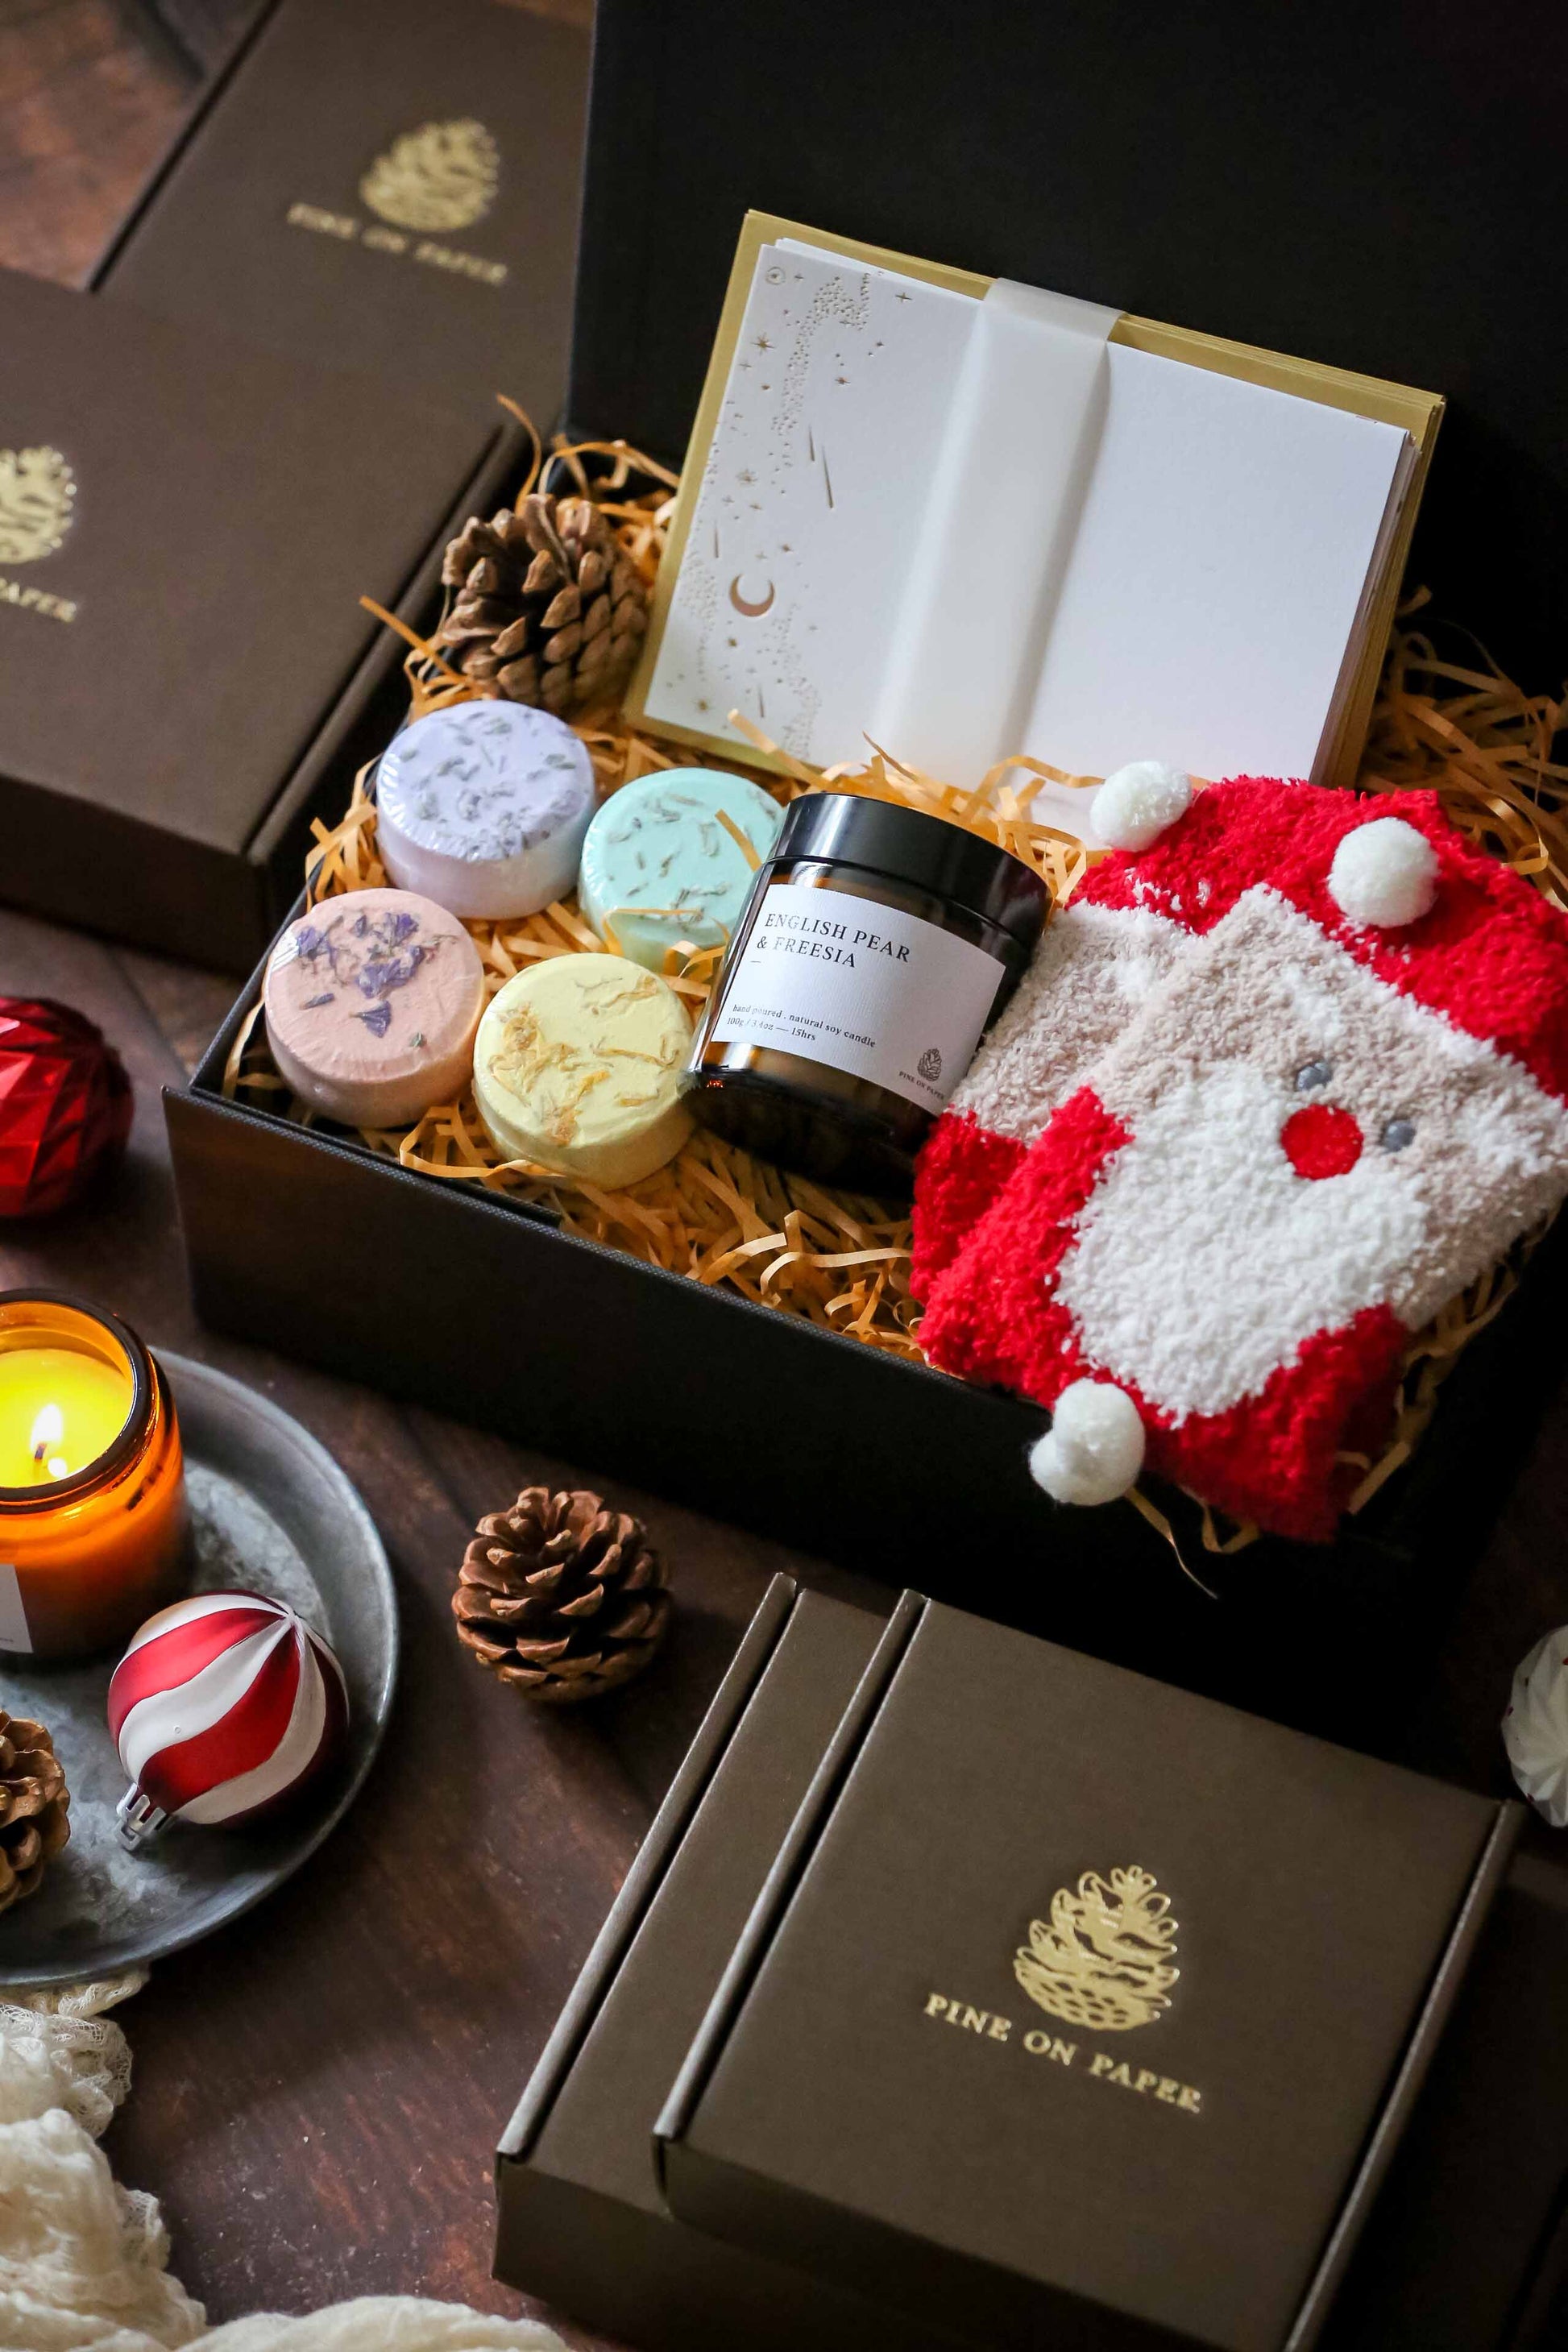 Set includes Box of 10 Foil-Stamped Note Cards, 4 aromatic shower steamers, English Pear & Freesia Soy Wax Candle 100gm, Santa snuggly socks